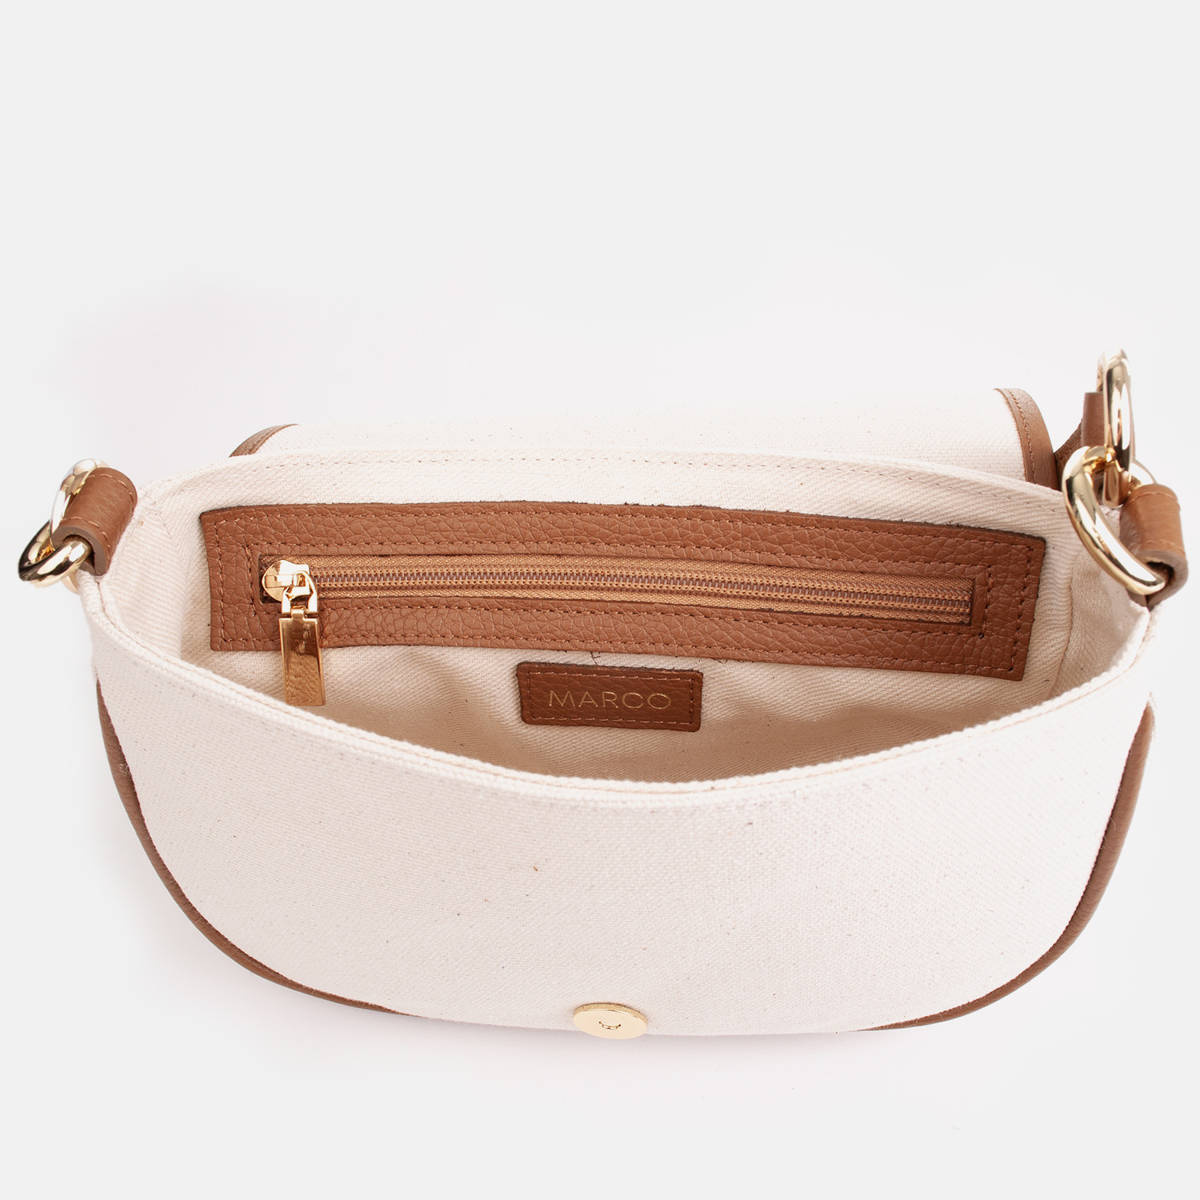 Faro bag with natural leather and canvas